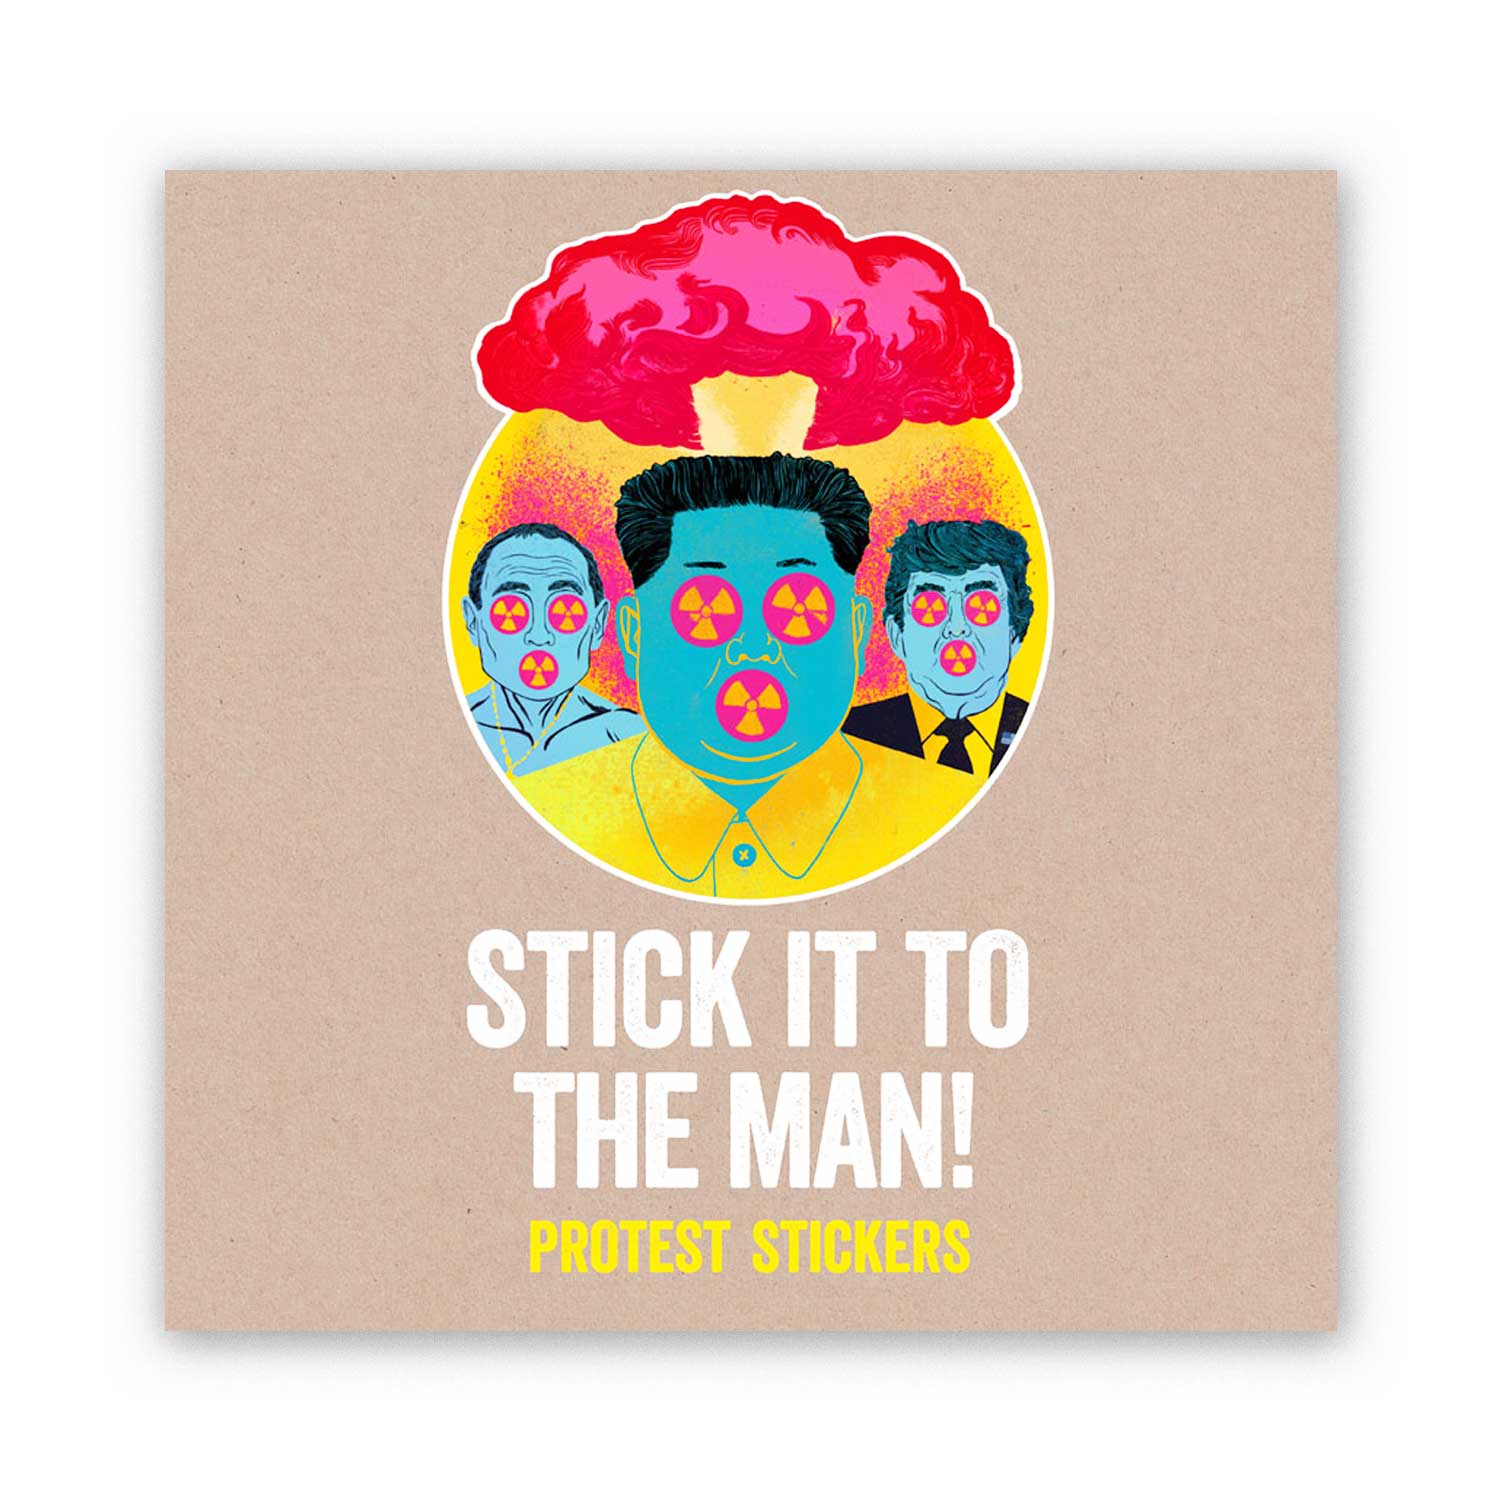 Stick it to the man!